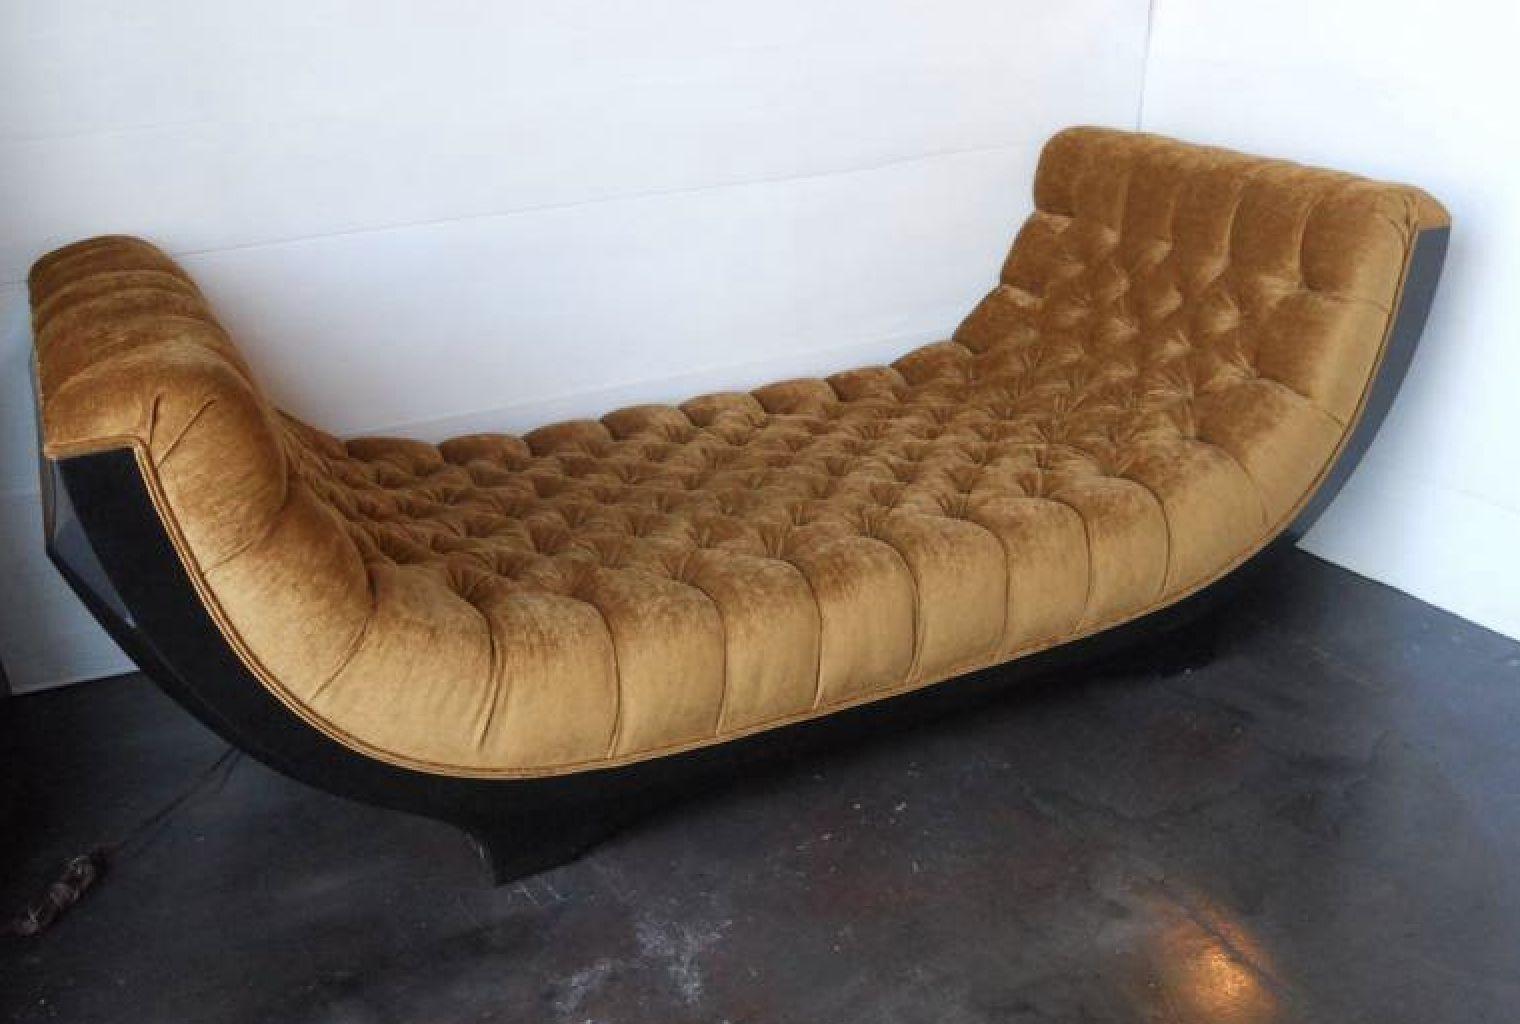 An outstanding Art Deco chaise lounge from the 1960's. Newly upholstered in a tufted brown chenille. Wood is an amazing Macassar ebony with beautiful detail.